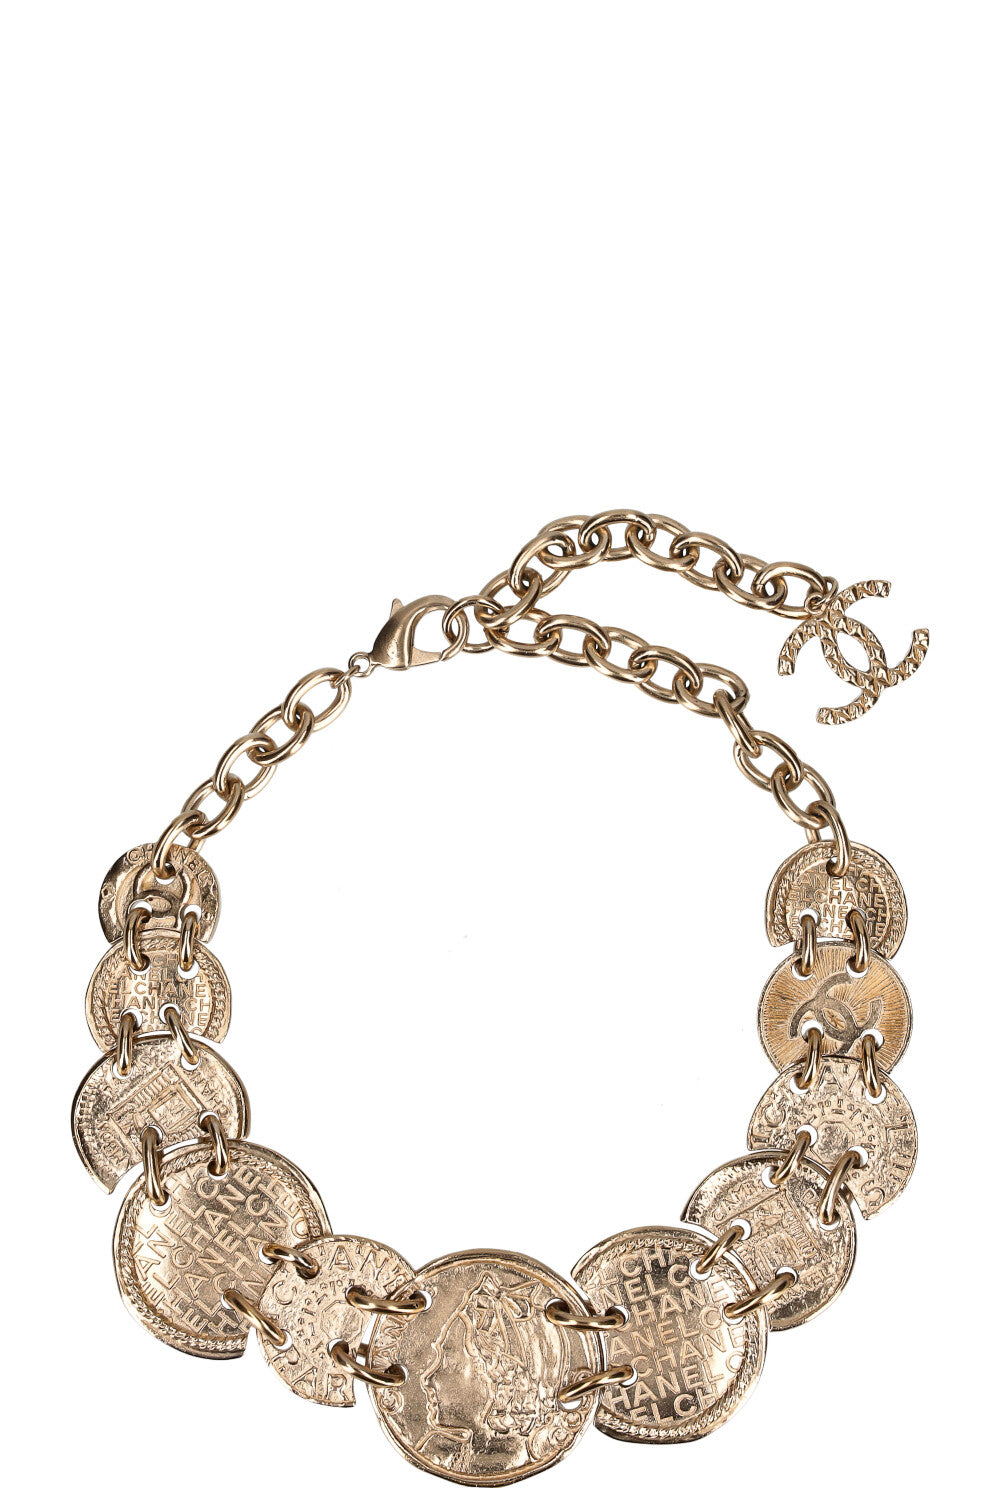 CHANEL Coin Necklace Champagne Prefall 2016